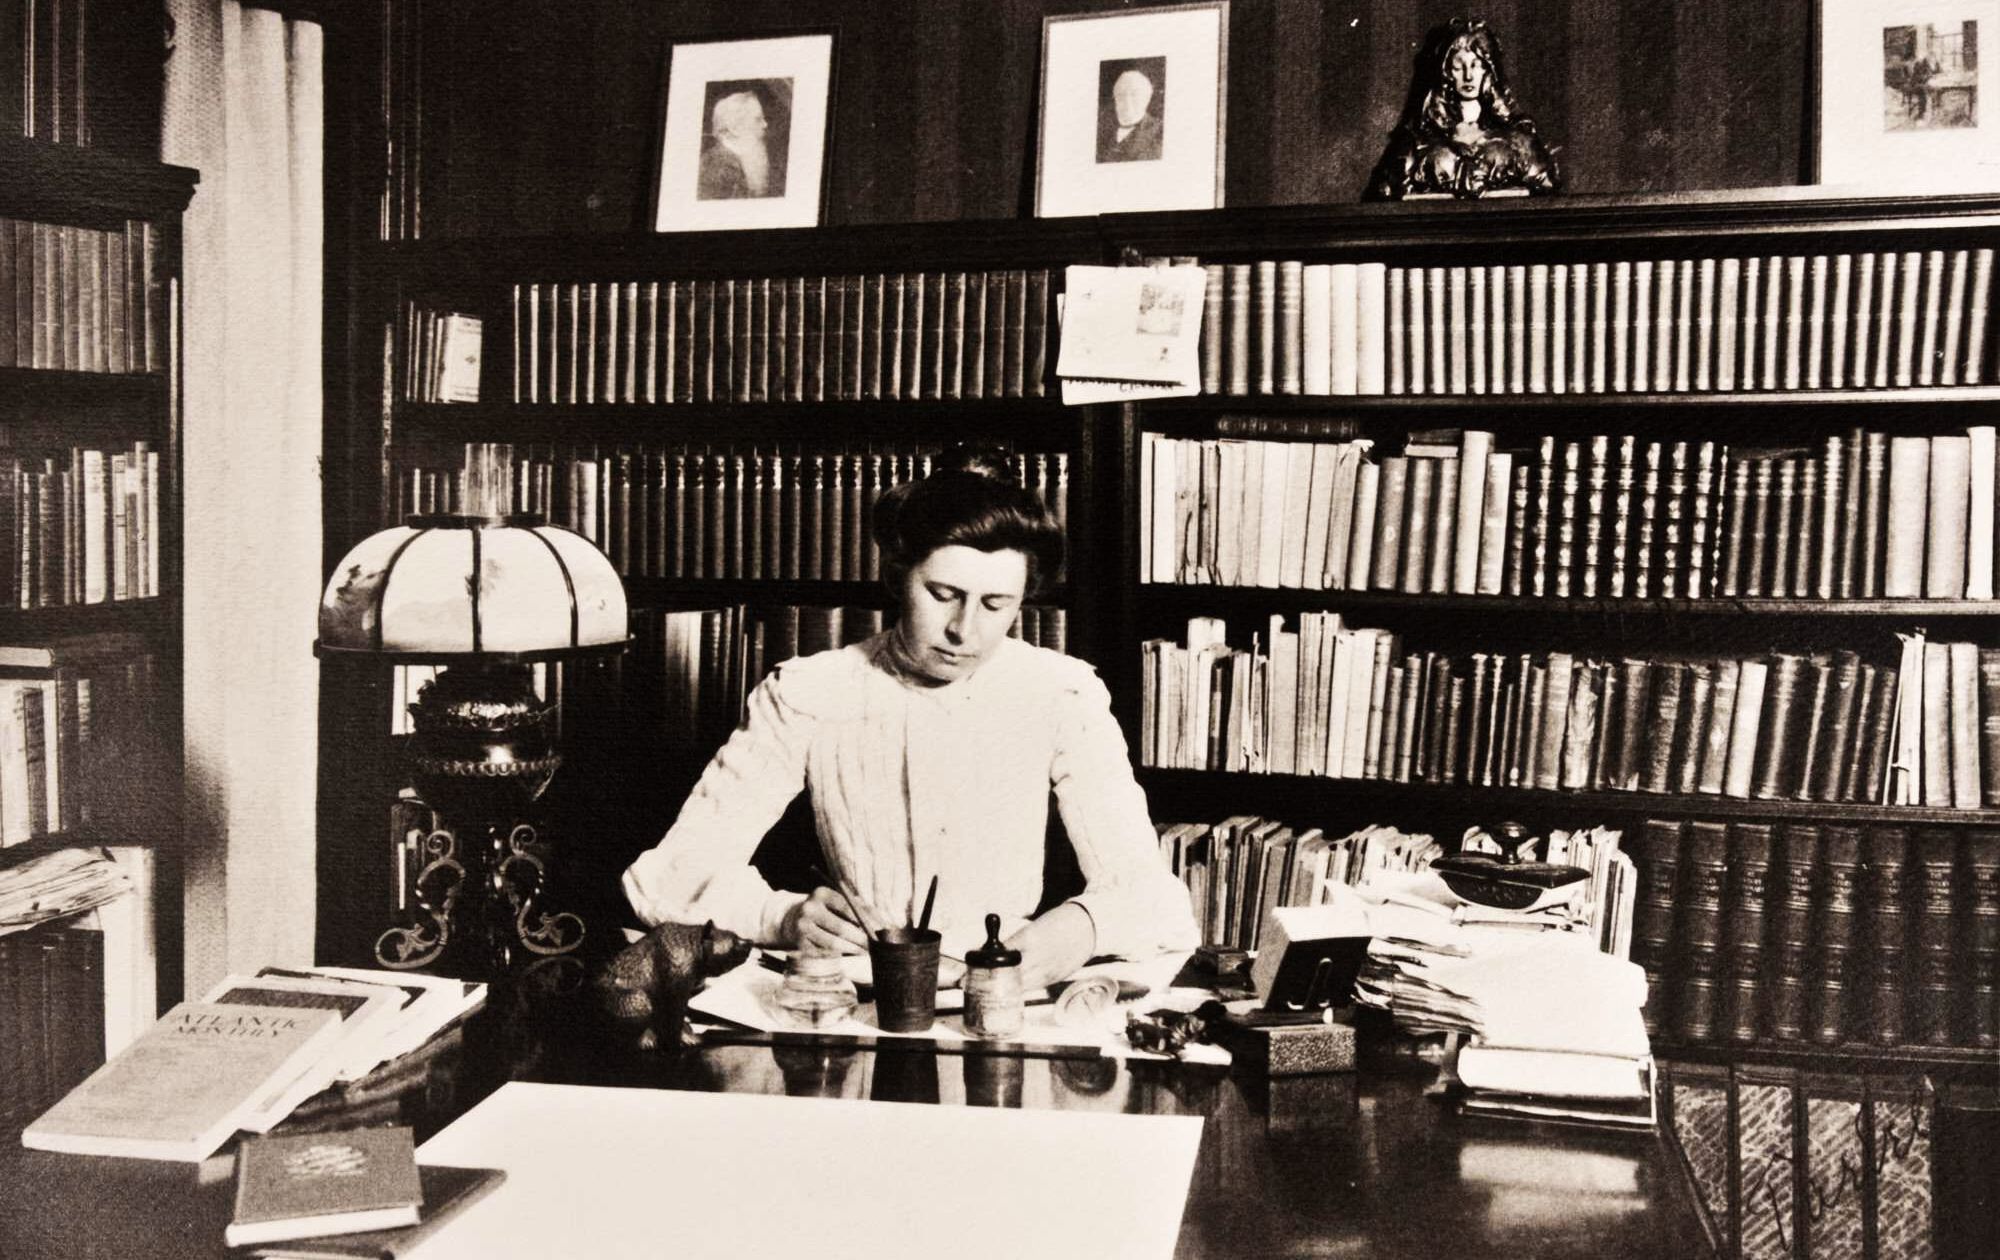 Ida Tarbell in 1905, courtesy of the Ida M. Tarbell Collection, Pelletier Library, Allegheny College